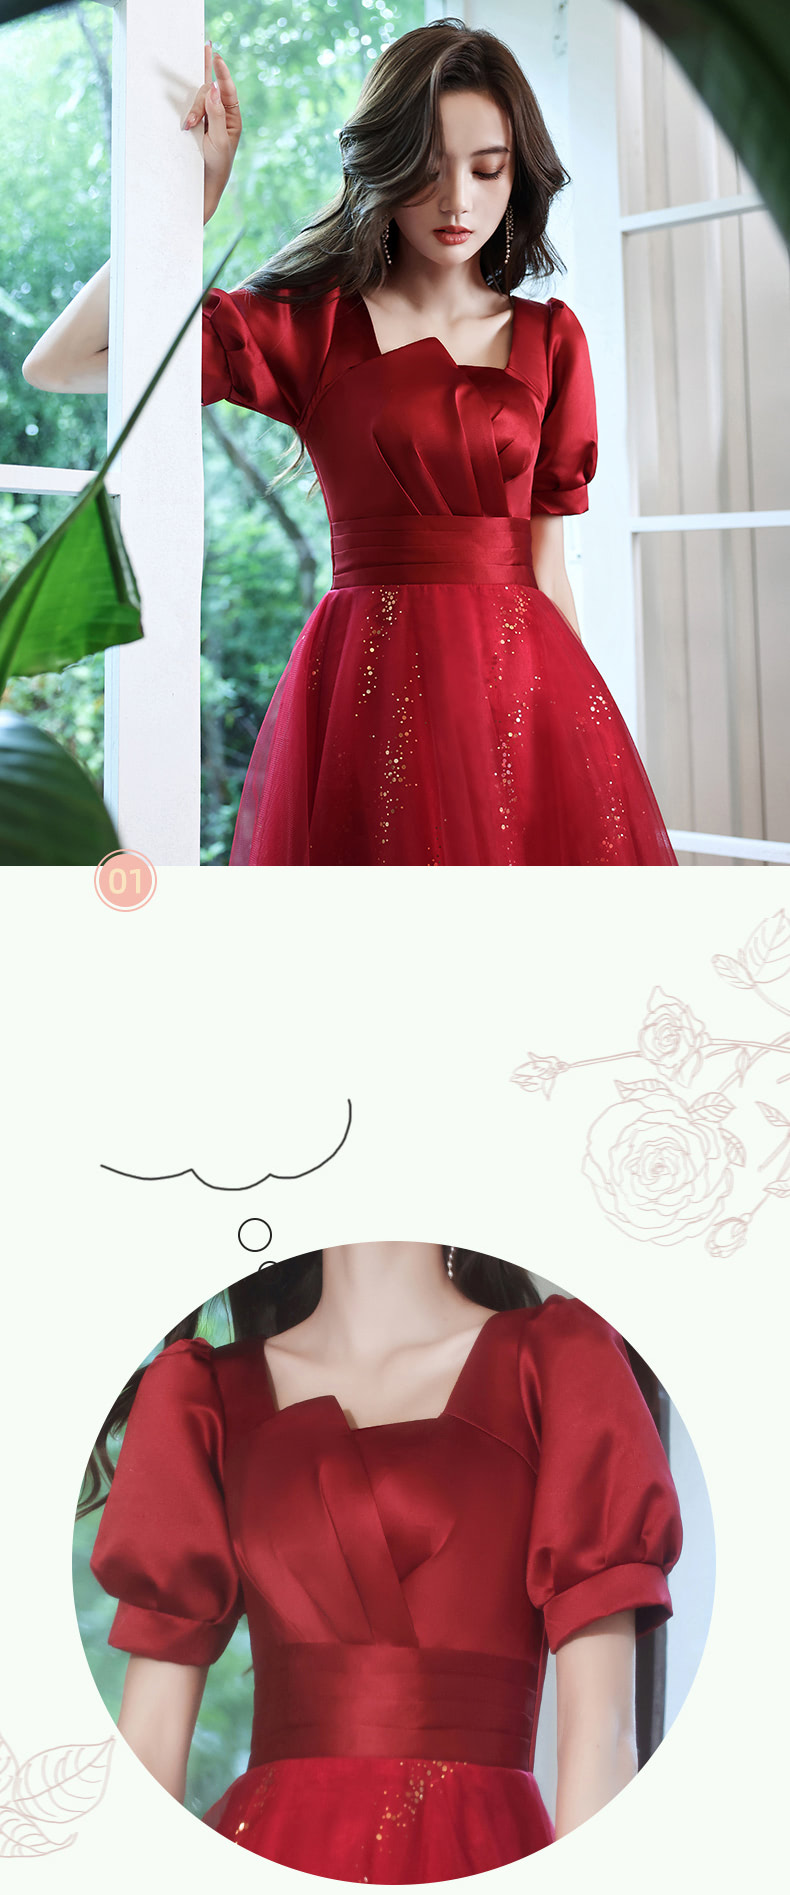 Square-Neck-Short-Puff-Sleeve-Burgundy-Tulle-Prom-Party-Dress11.jpg